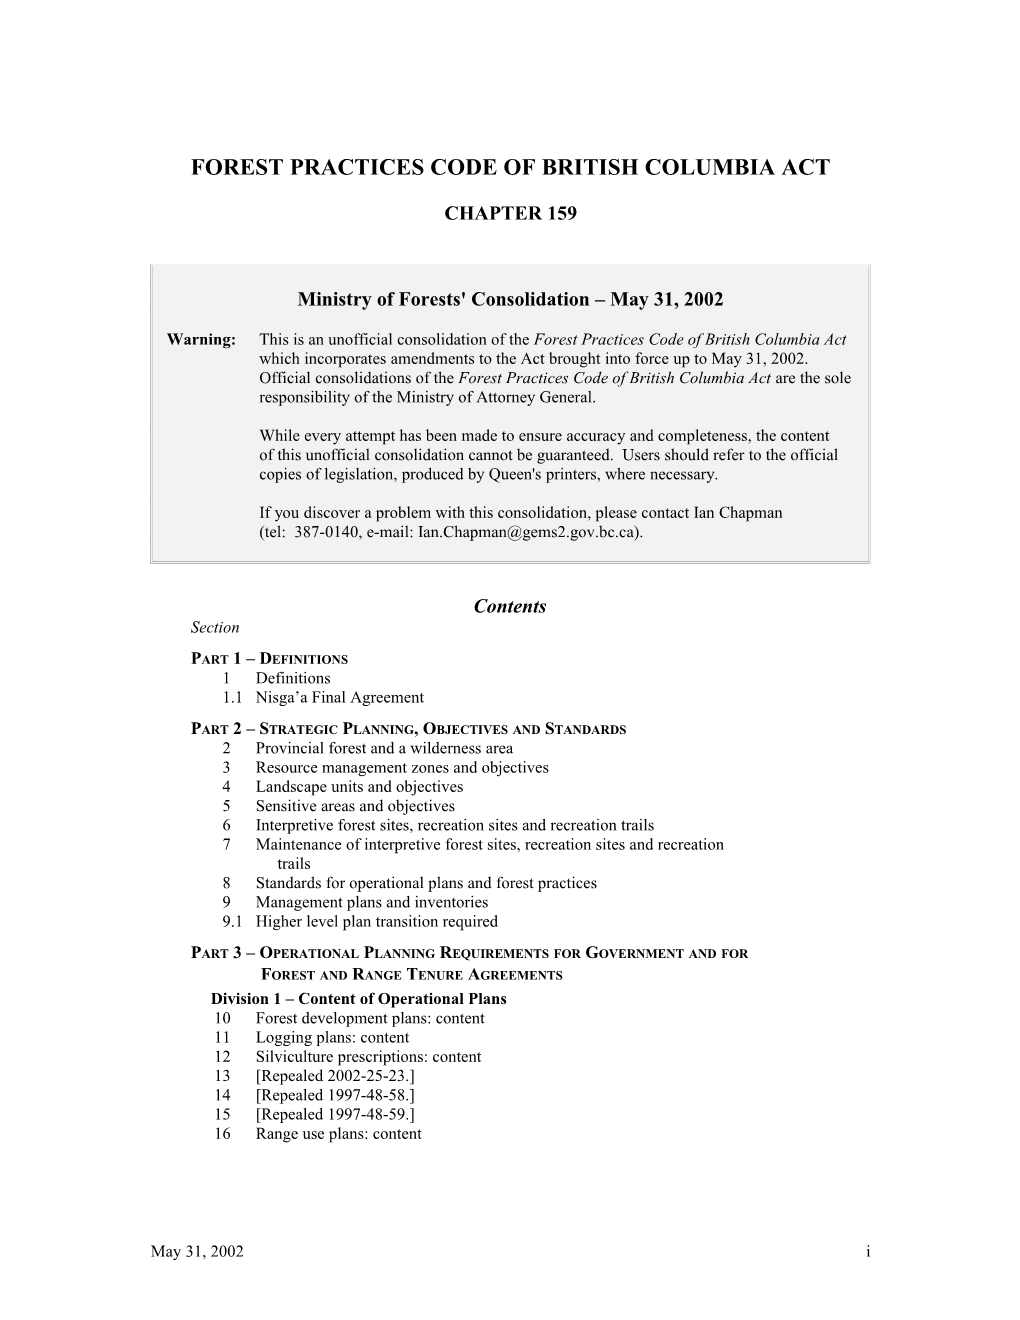 Forest Practices Code of British Columbia Act